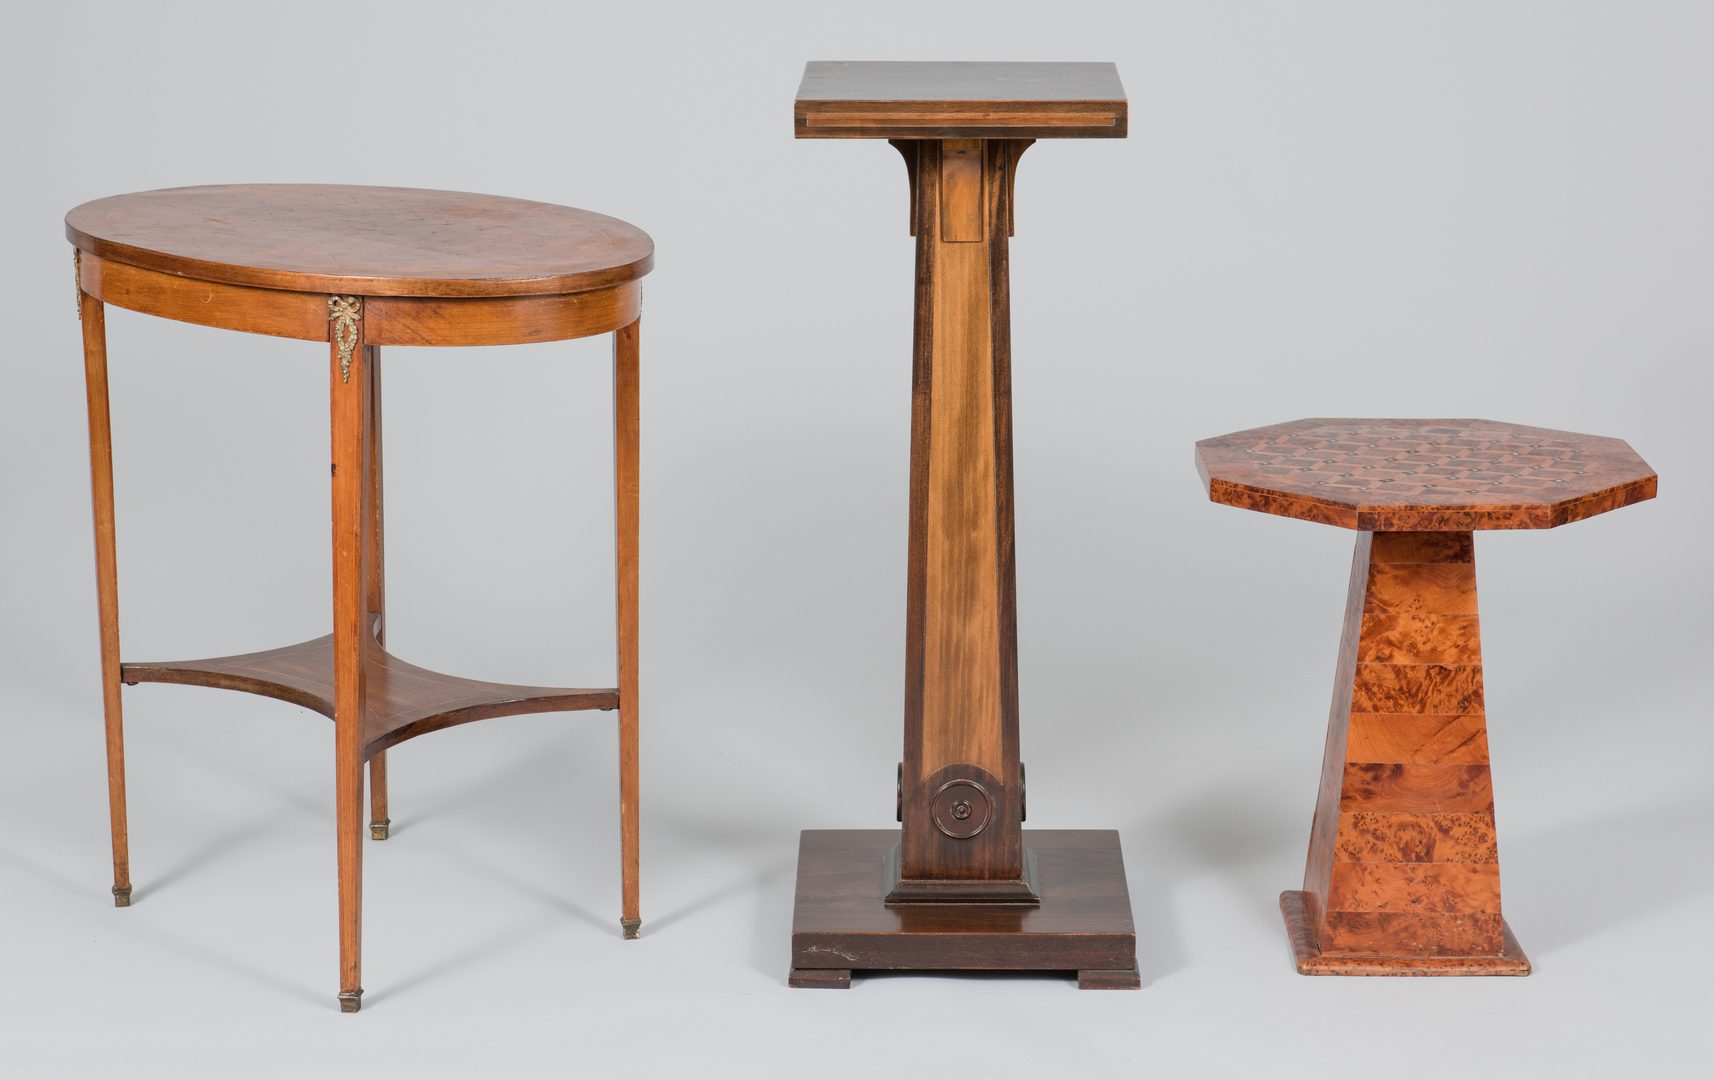 Lot 504: Three Decorative Tables / Stands